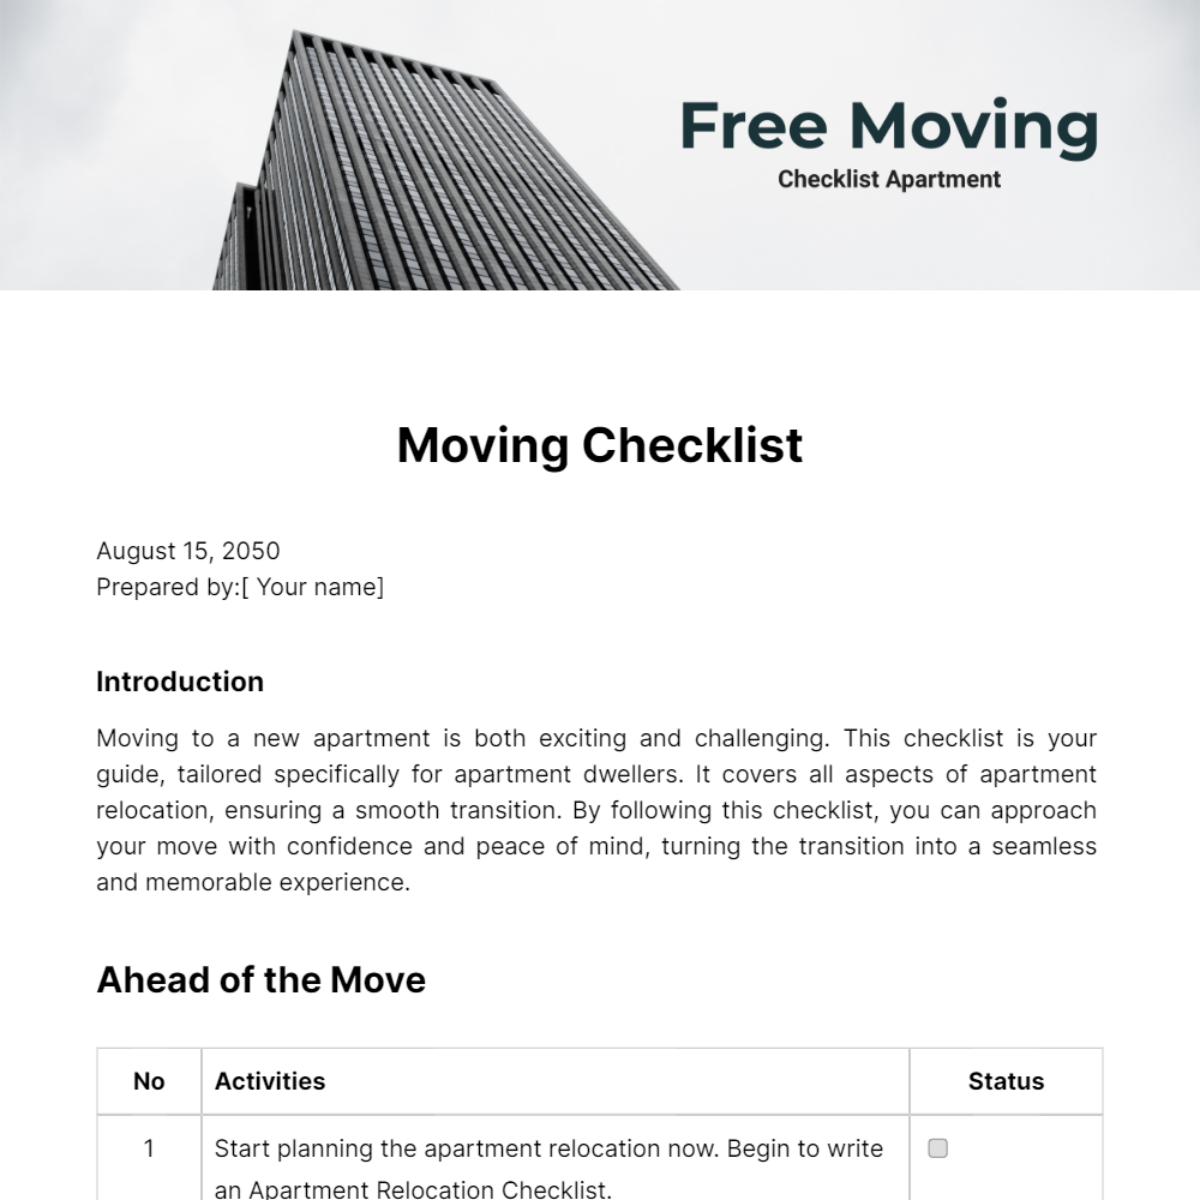 Free Moving Checklist Apartment Template